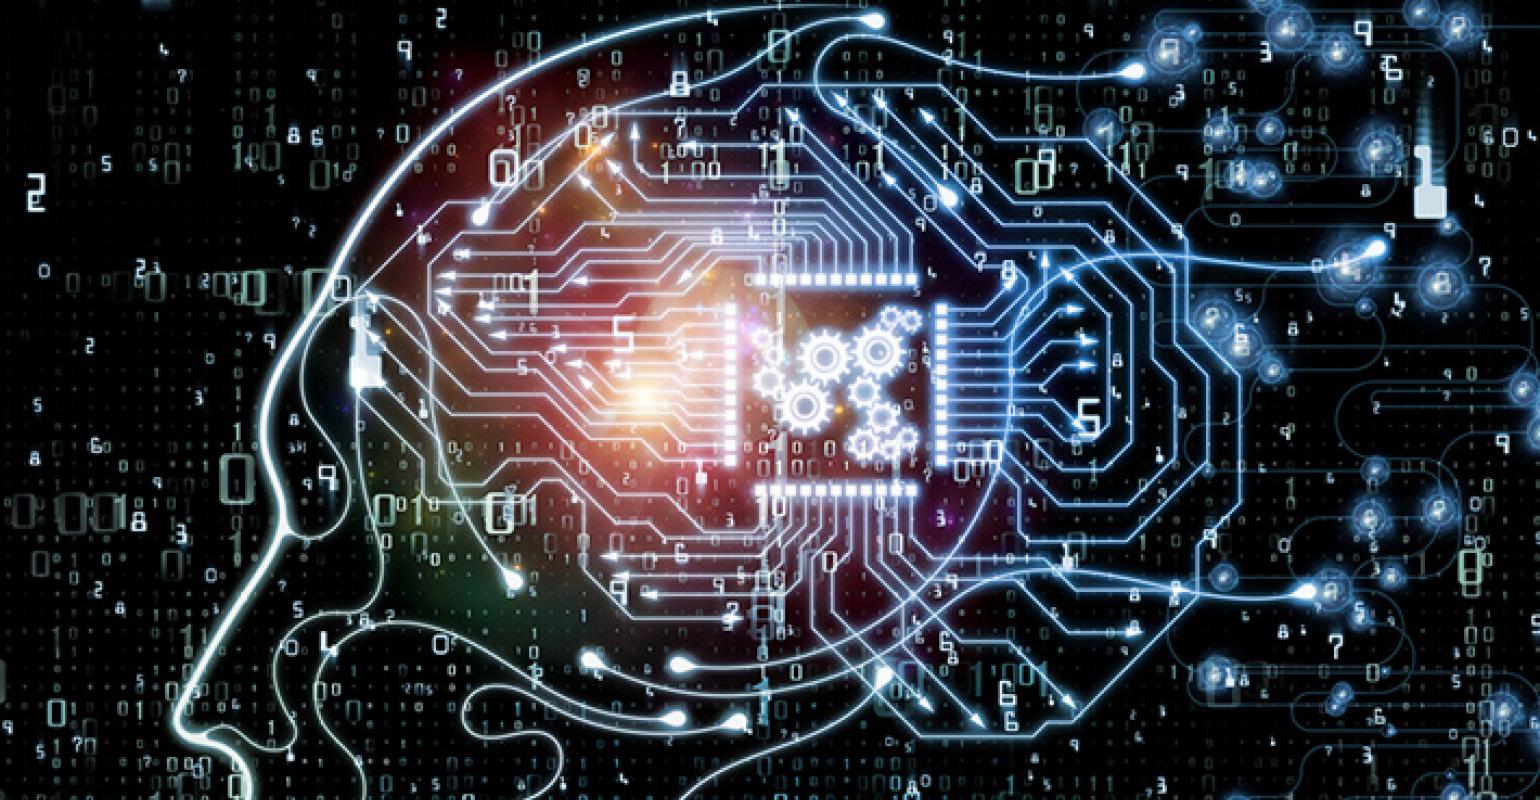 How Artificial Intelligence Can Improve Your Health and Productivity